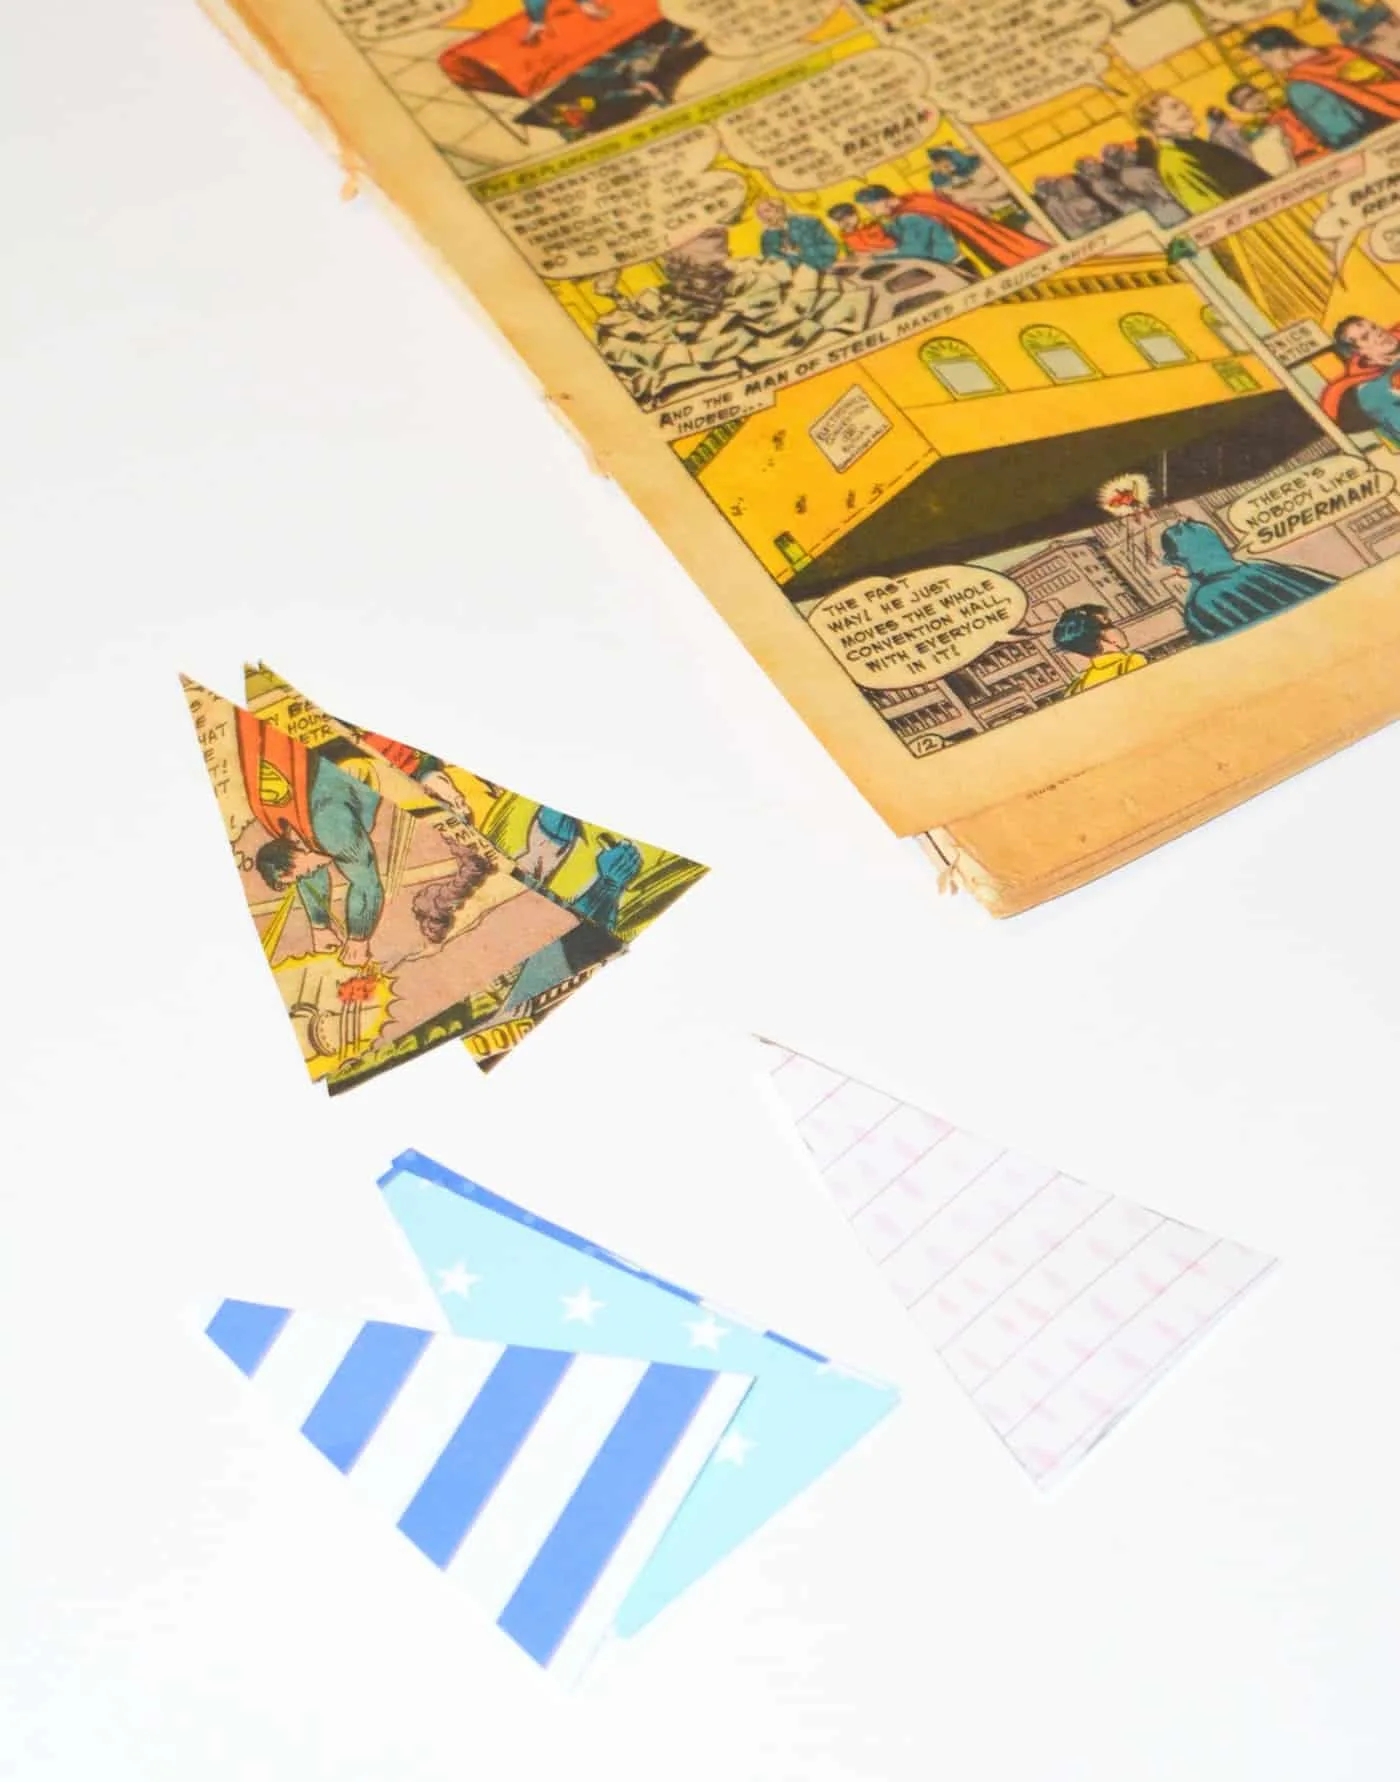 Cutting pieces of comic book out using the template